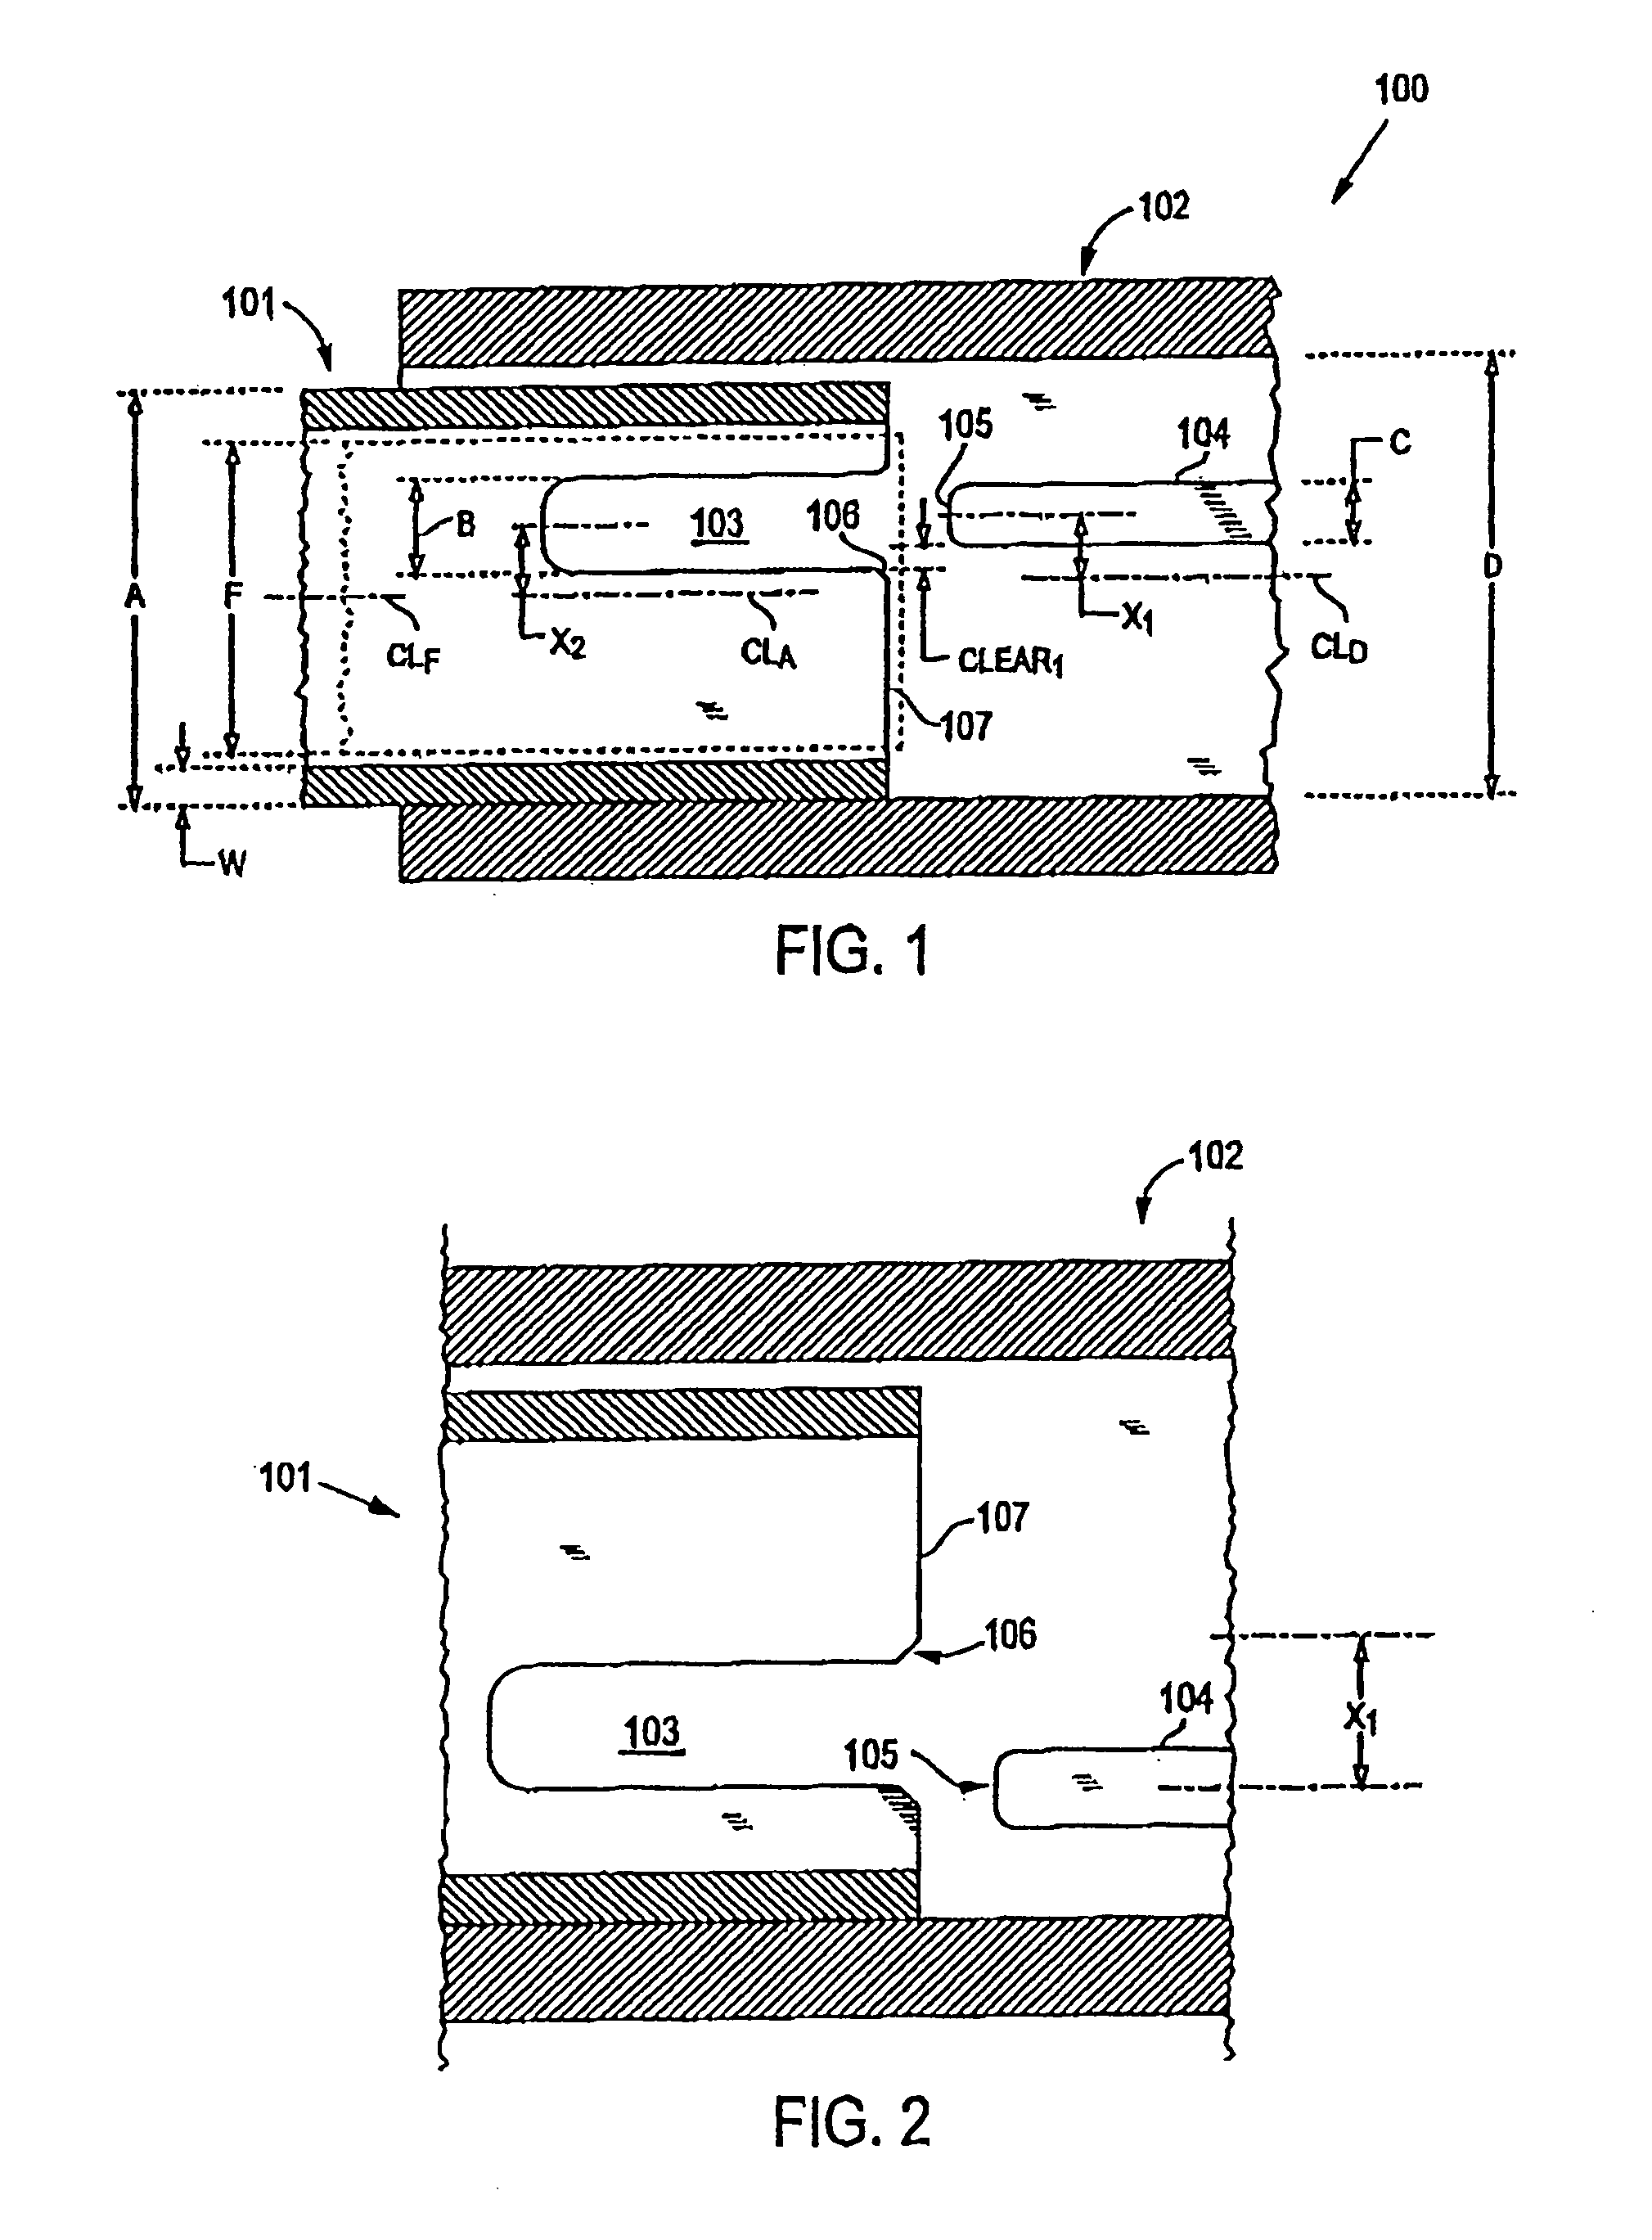 Connector and receptacle containing a physical security feature